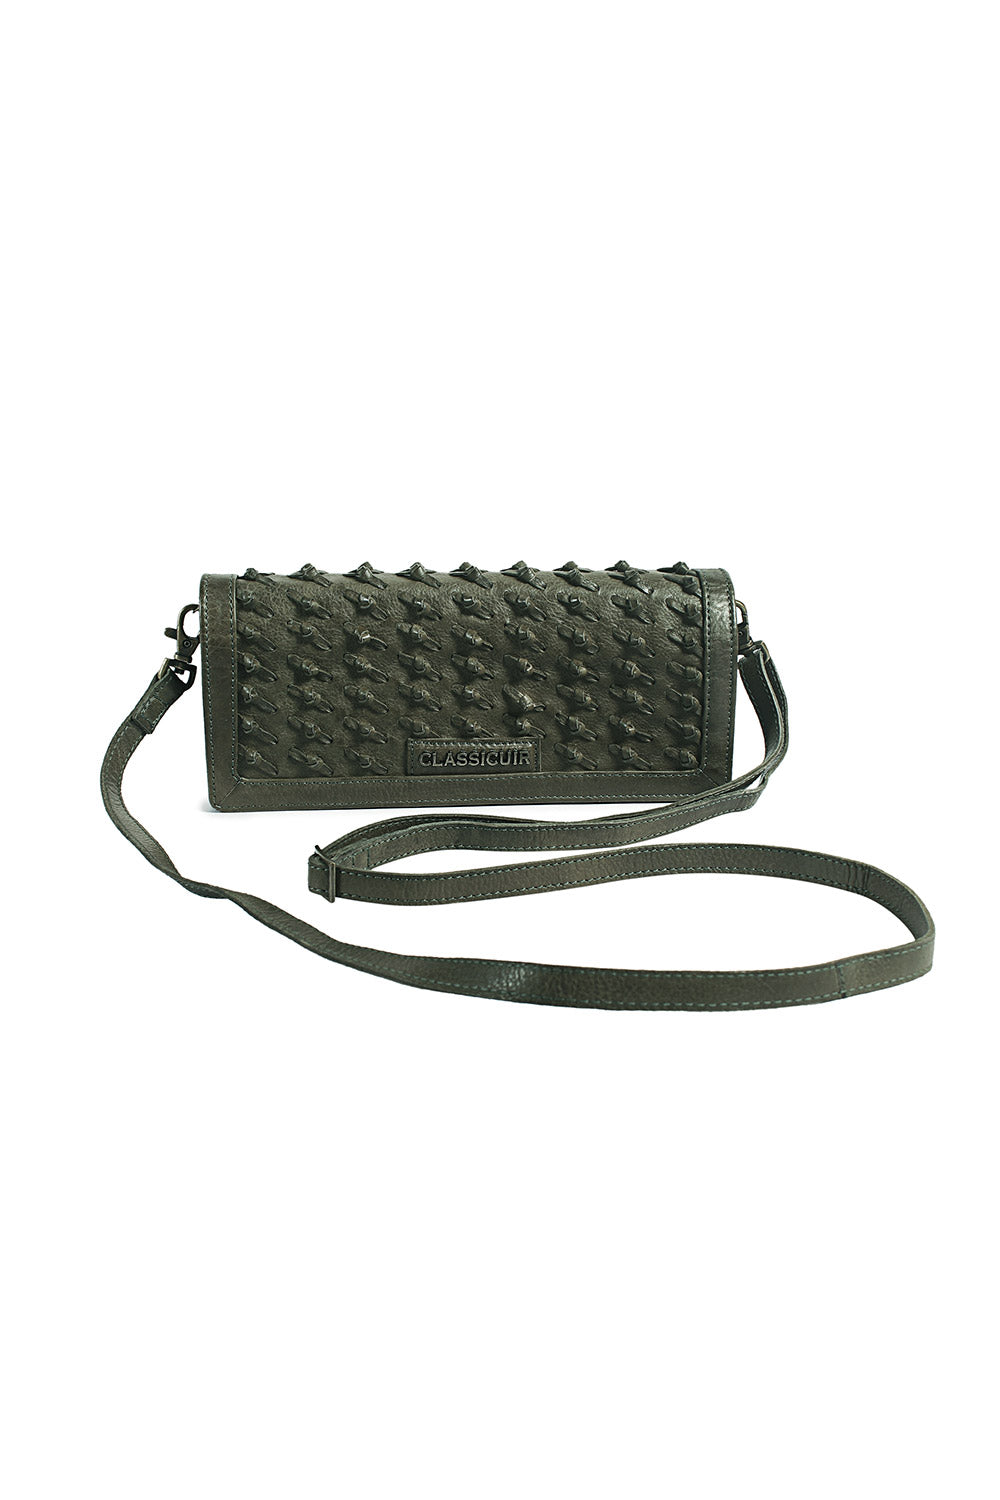 Marseille Knotted Weave Sling Bag